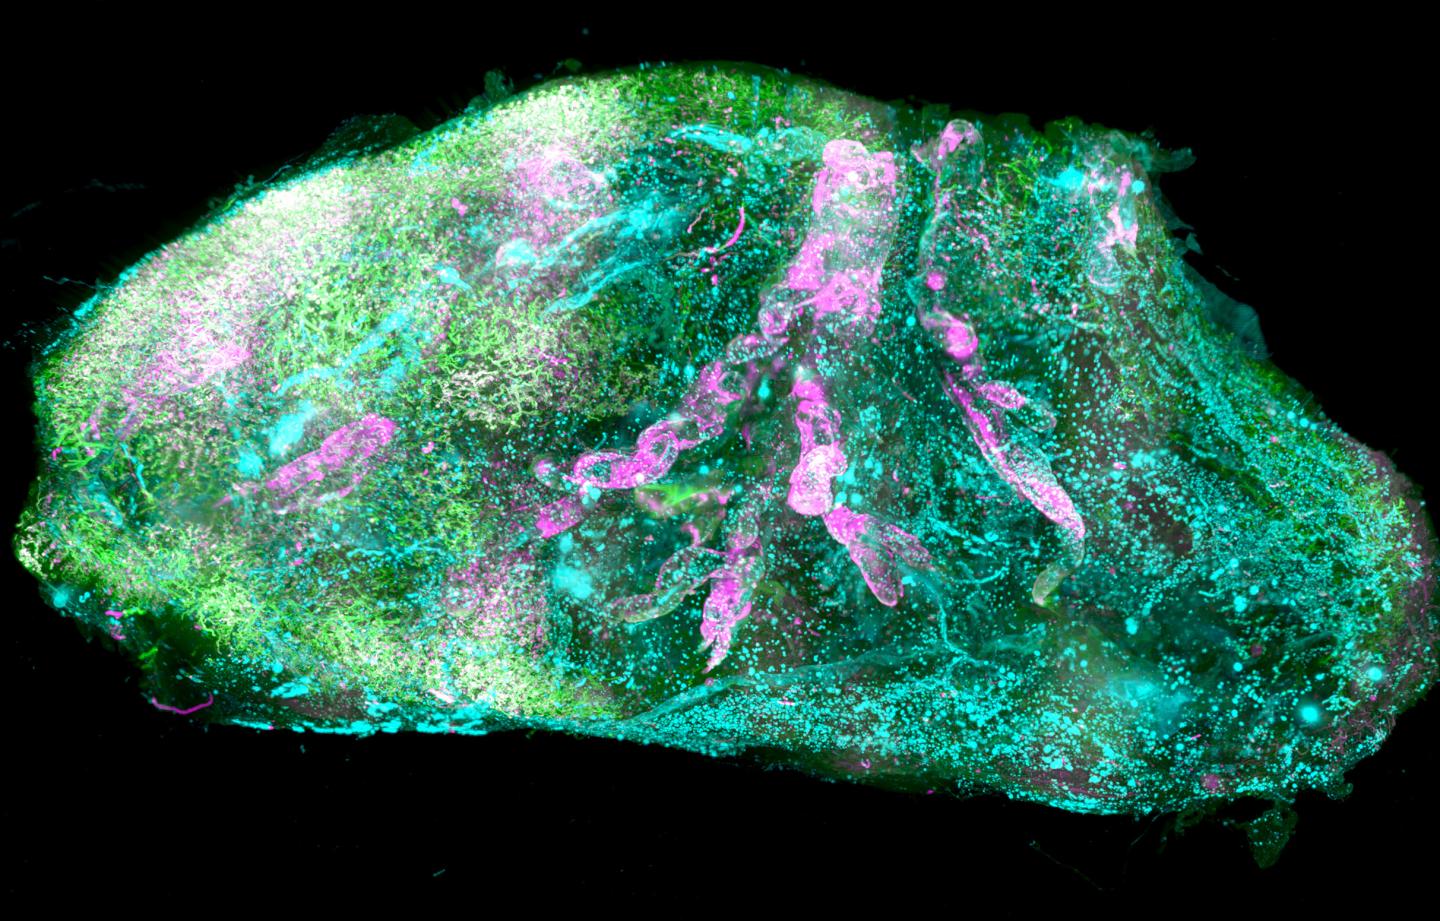 Condensed light traveling end-to-end in a transparent human brain made visible with SHANEL